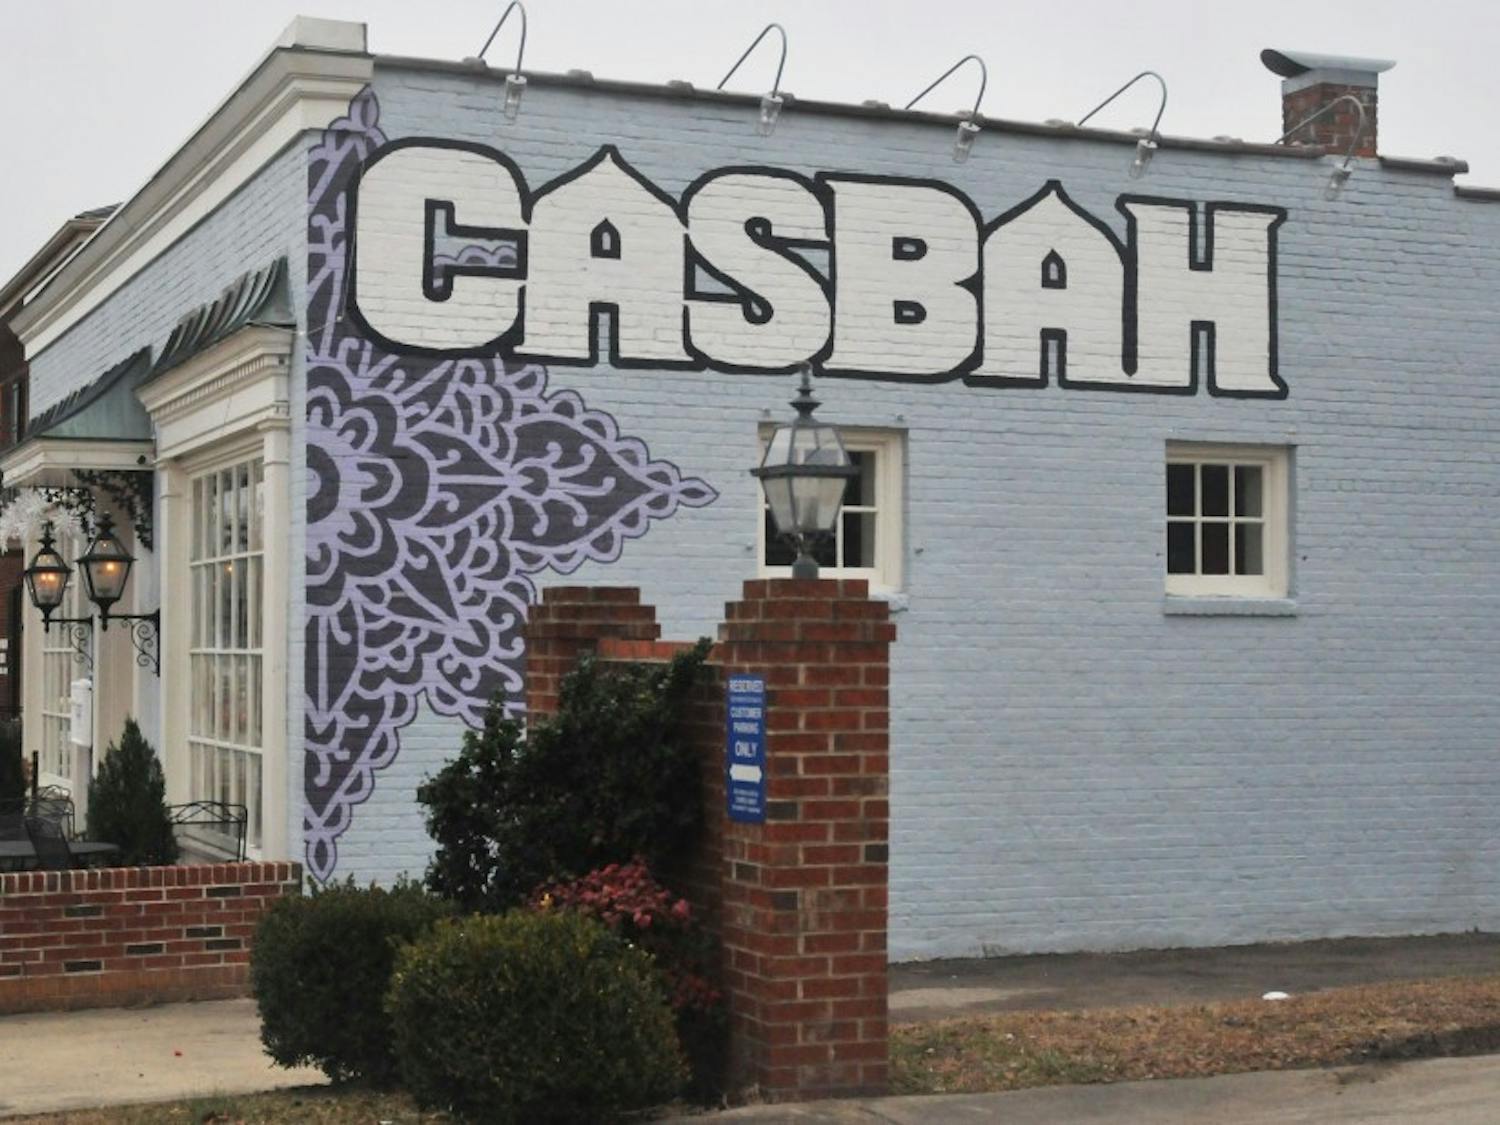 Casbah will be replaced by Social Games and Brews, a bar with old-school arcade games such as skee ball.